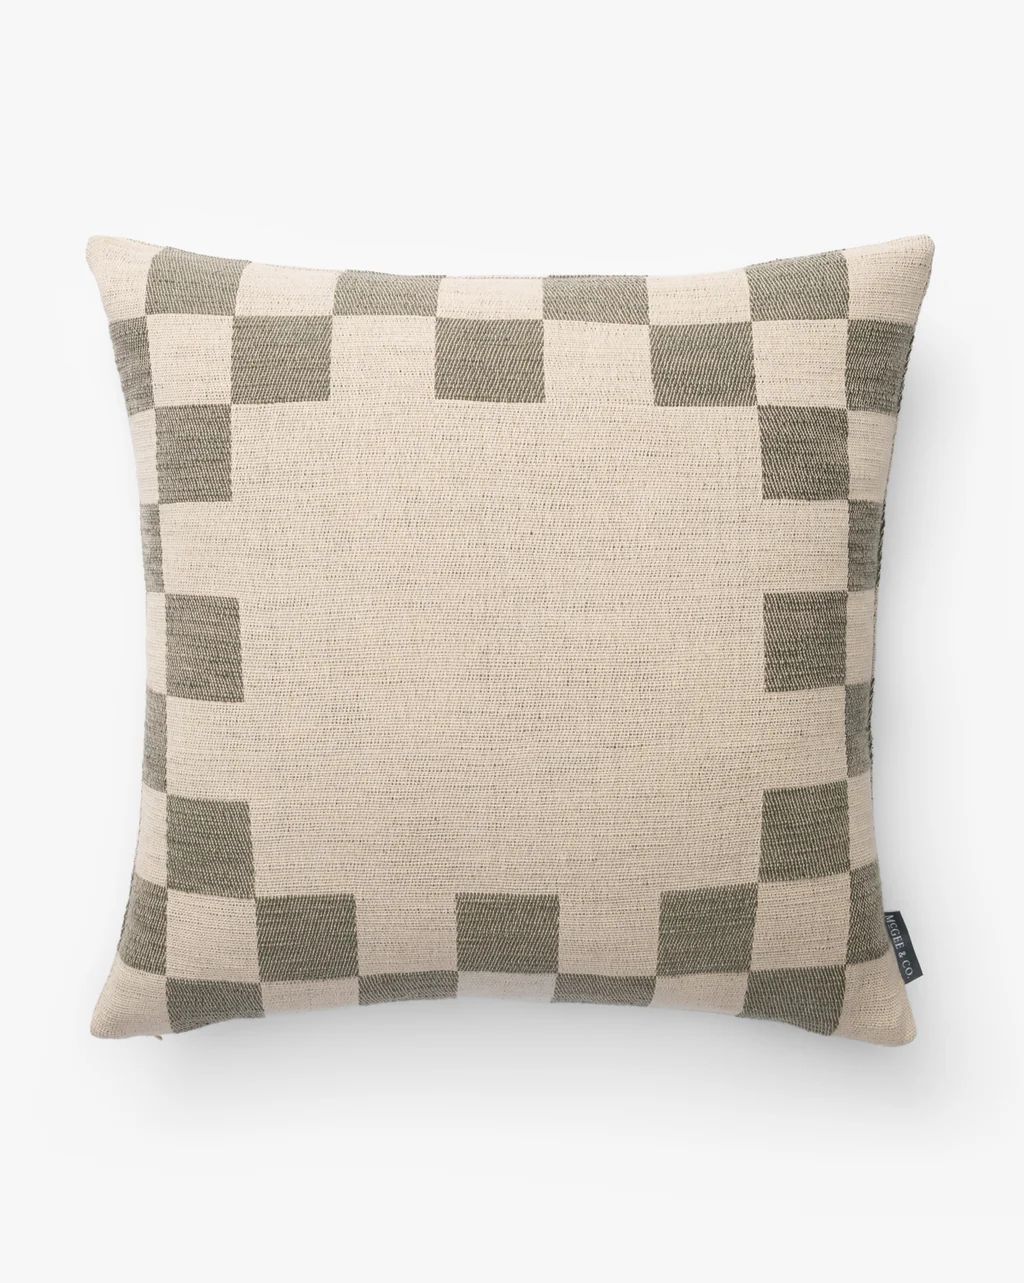 Marni Pillow Cover | McGee & Co. (US)